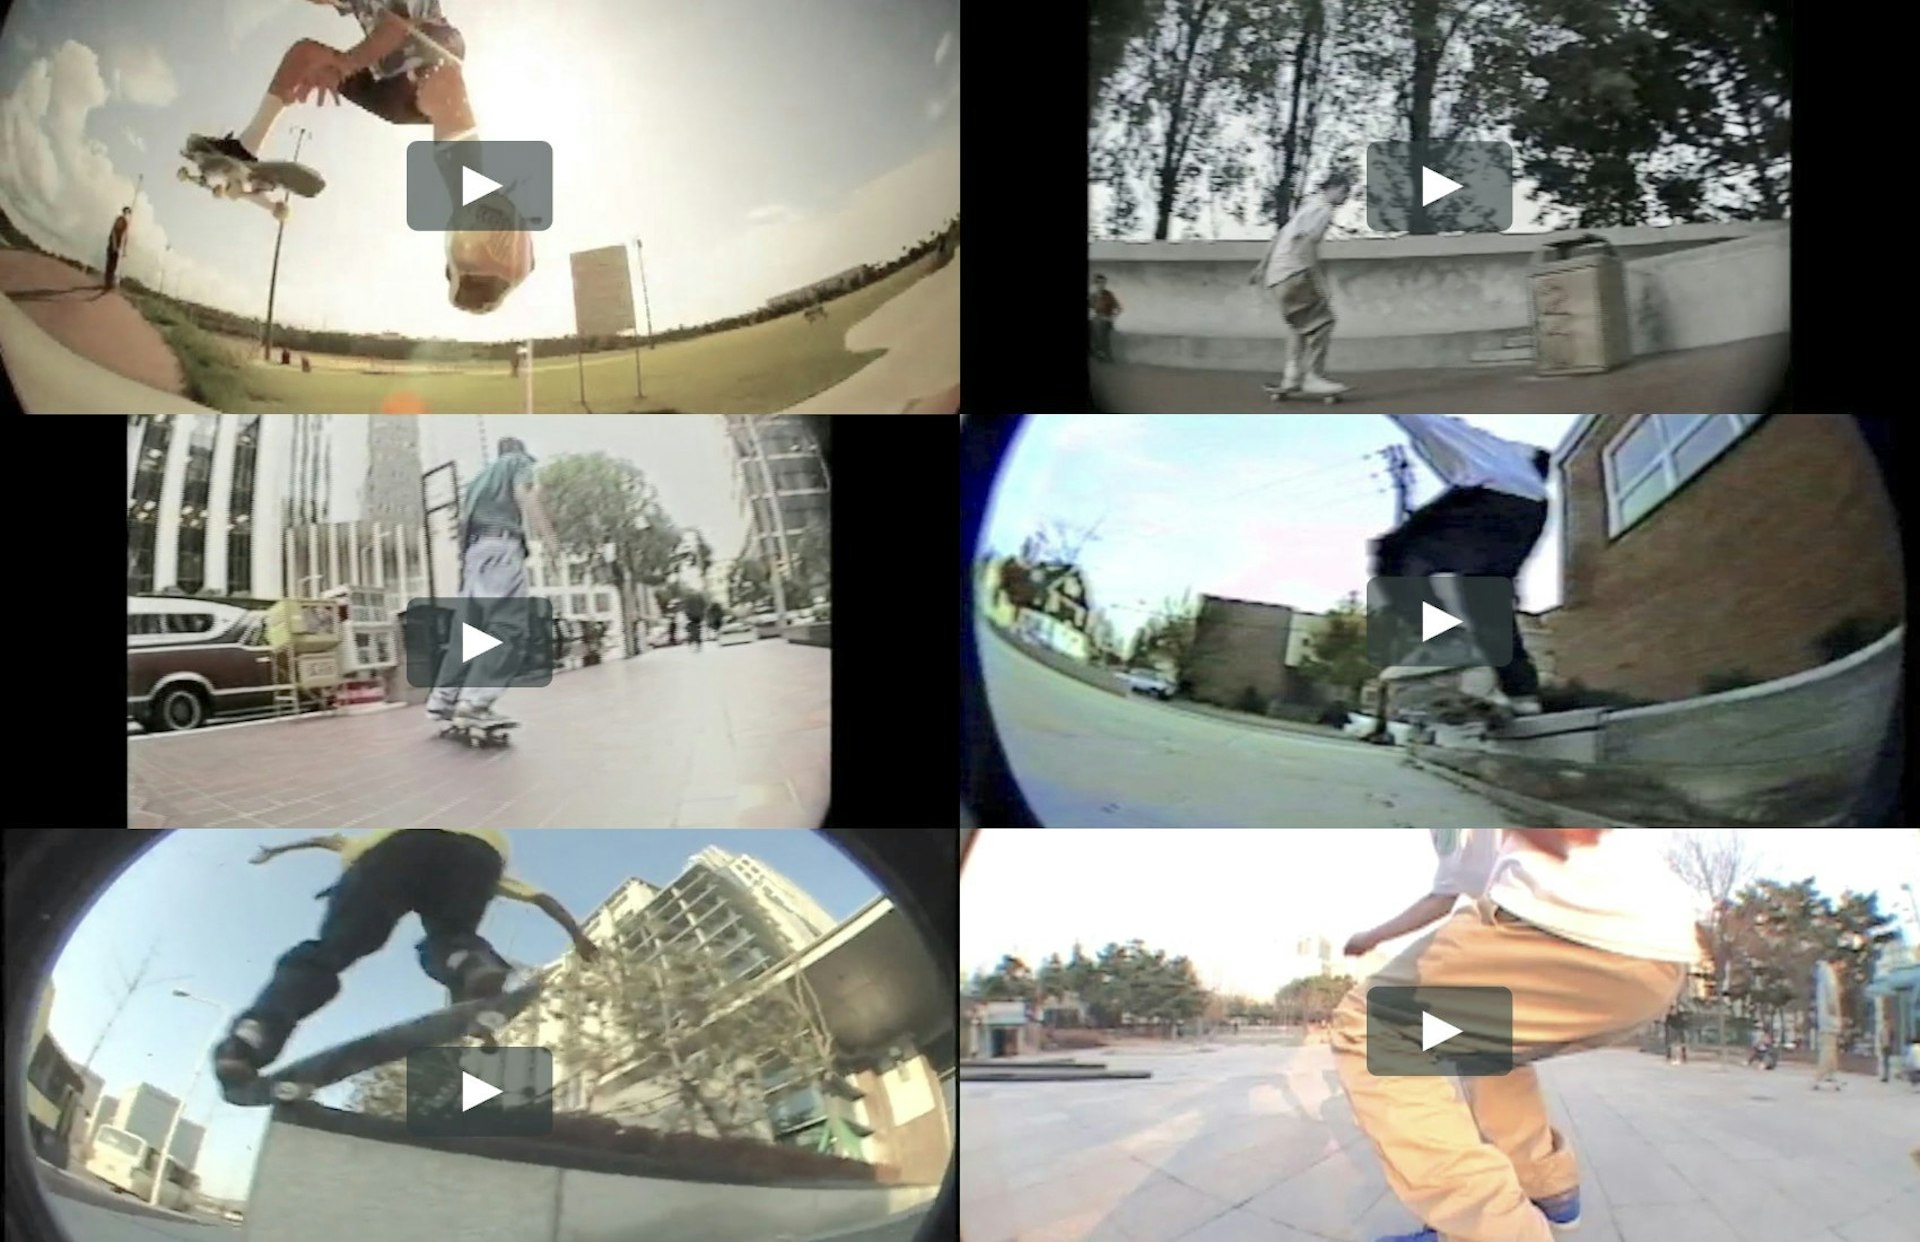 Why old skate videos are getting me through the pandemic